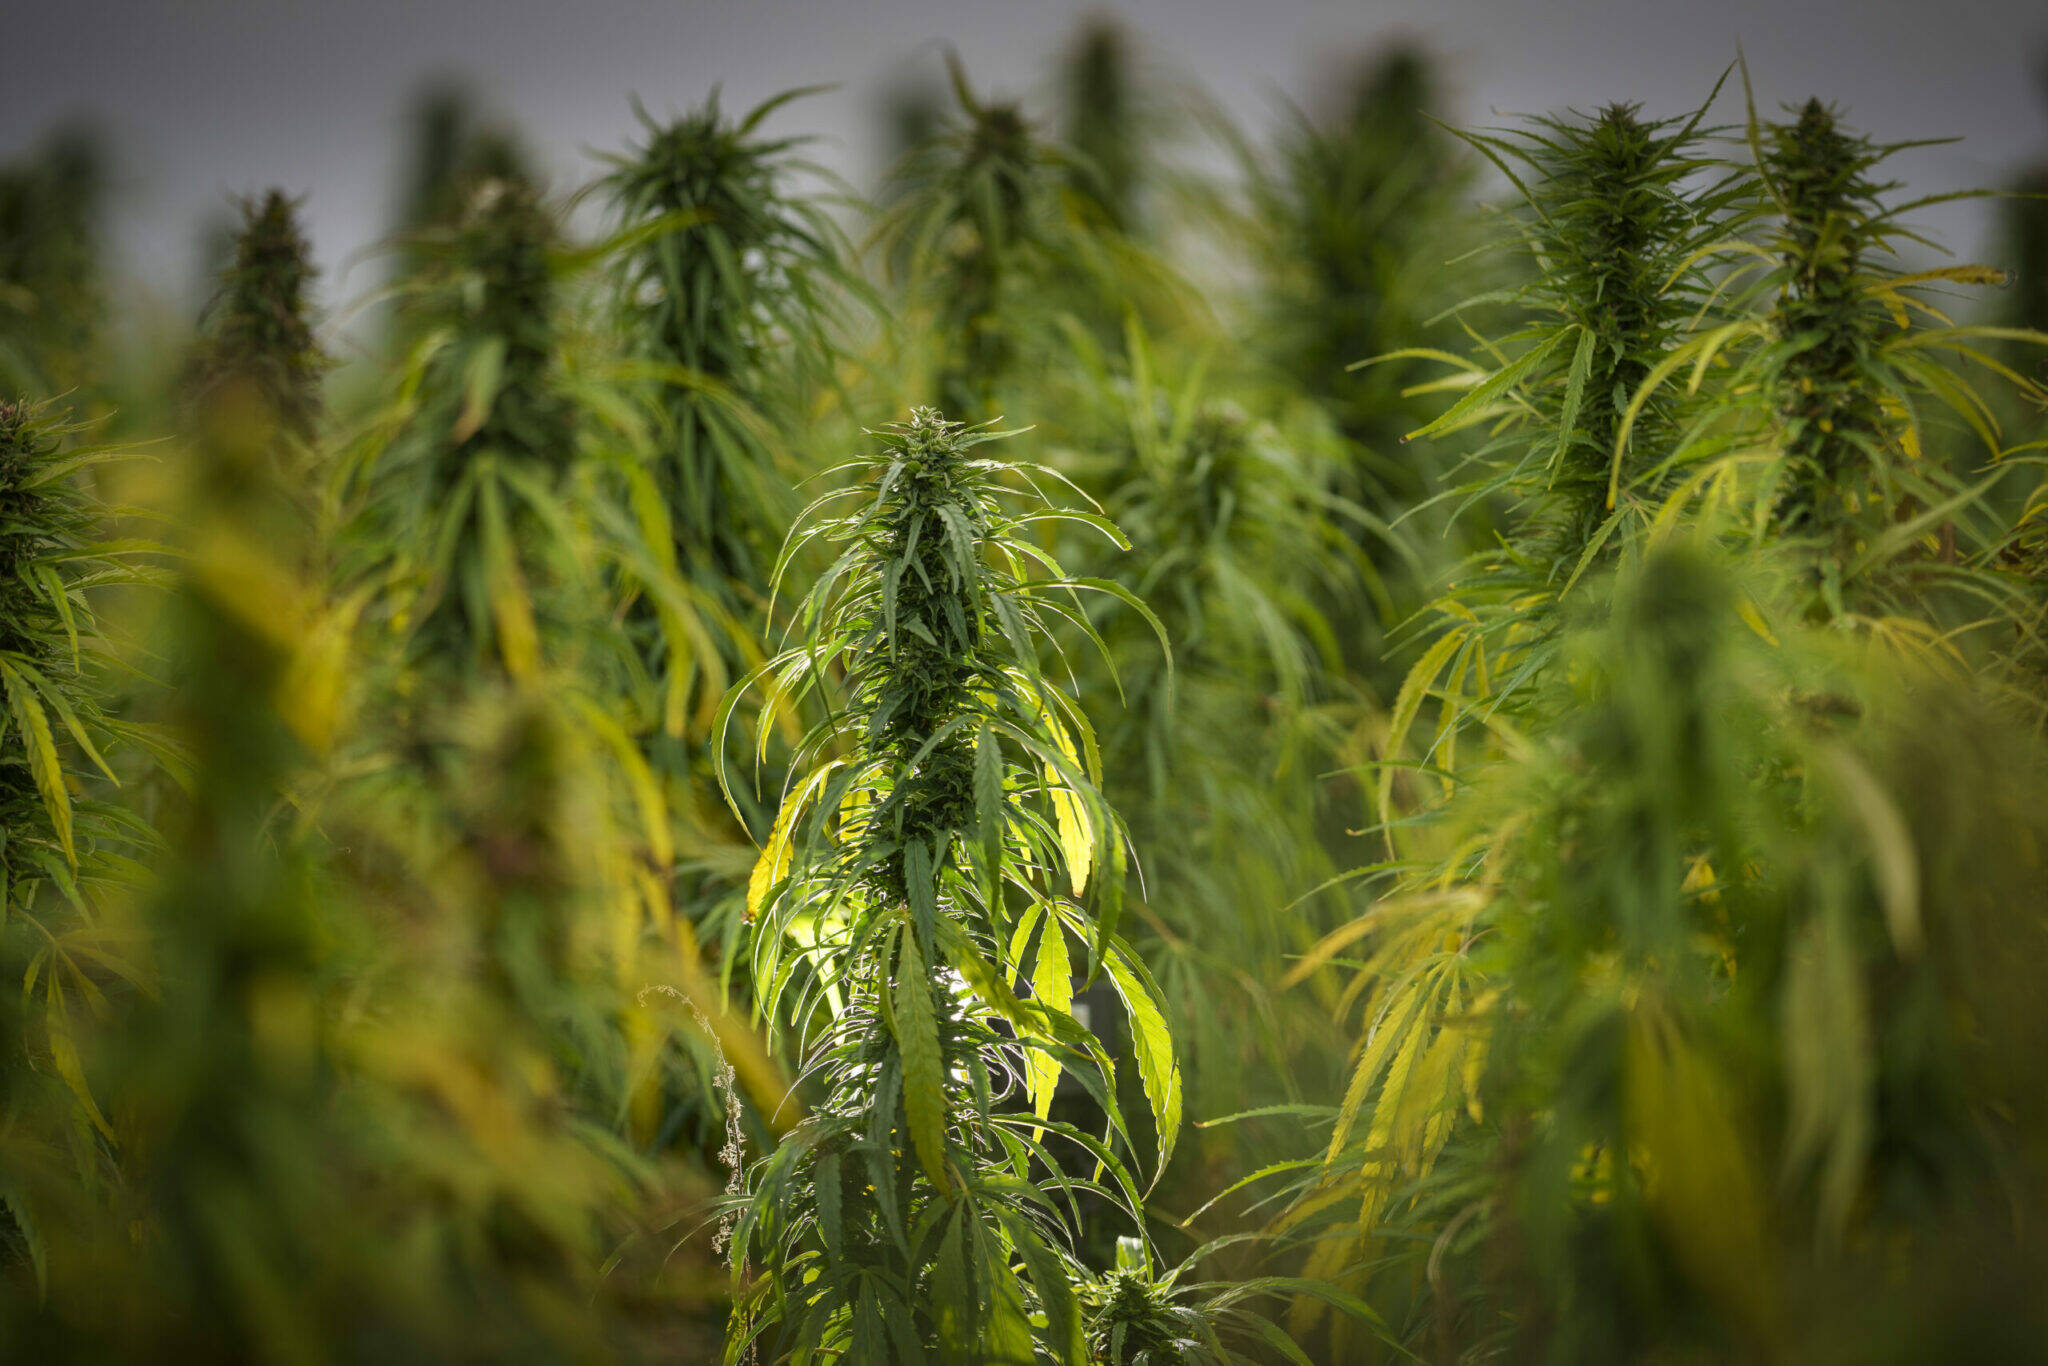 A hemp crop waits to be harvested in Lincolnshire for British CBD oil producer Crop England on Aug. 27, 2021, in Grantham, England. (Photo by Christopher Furlong/Getty Images)